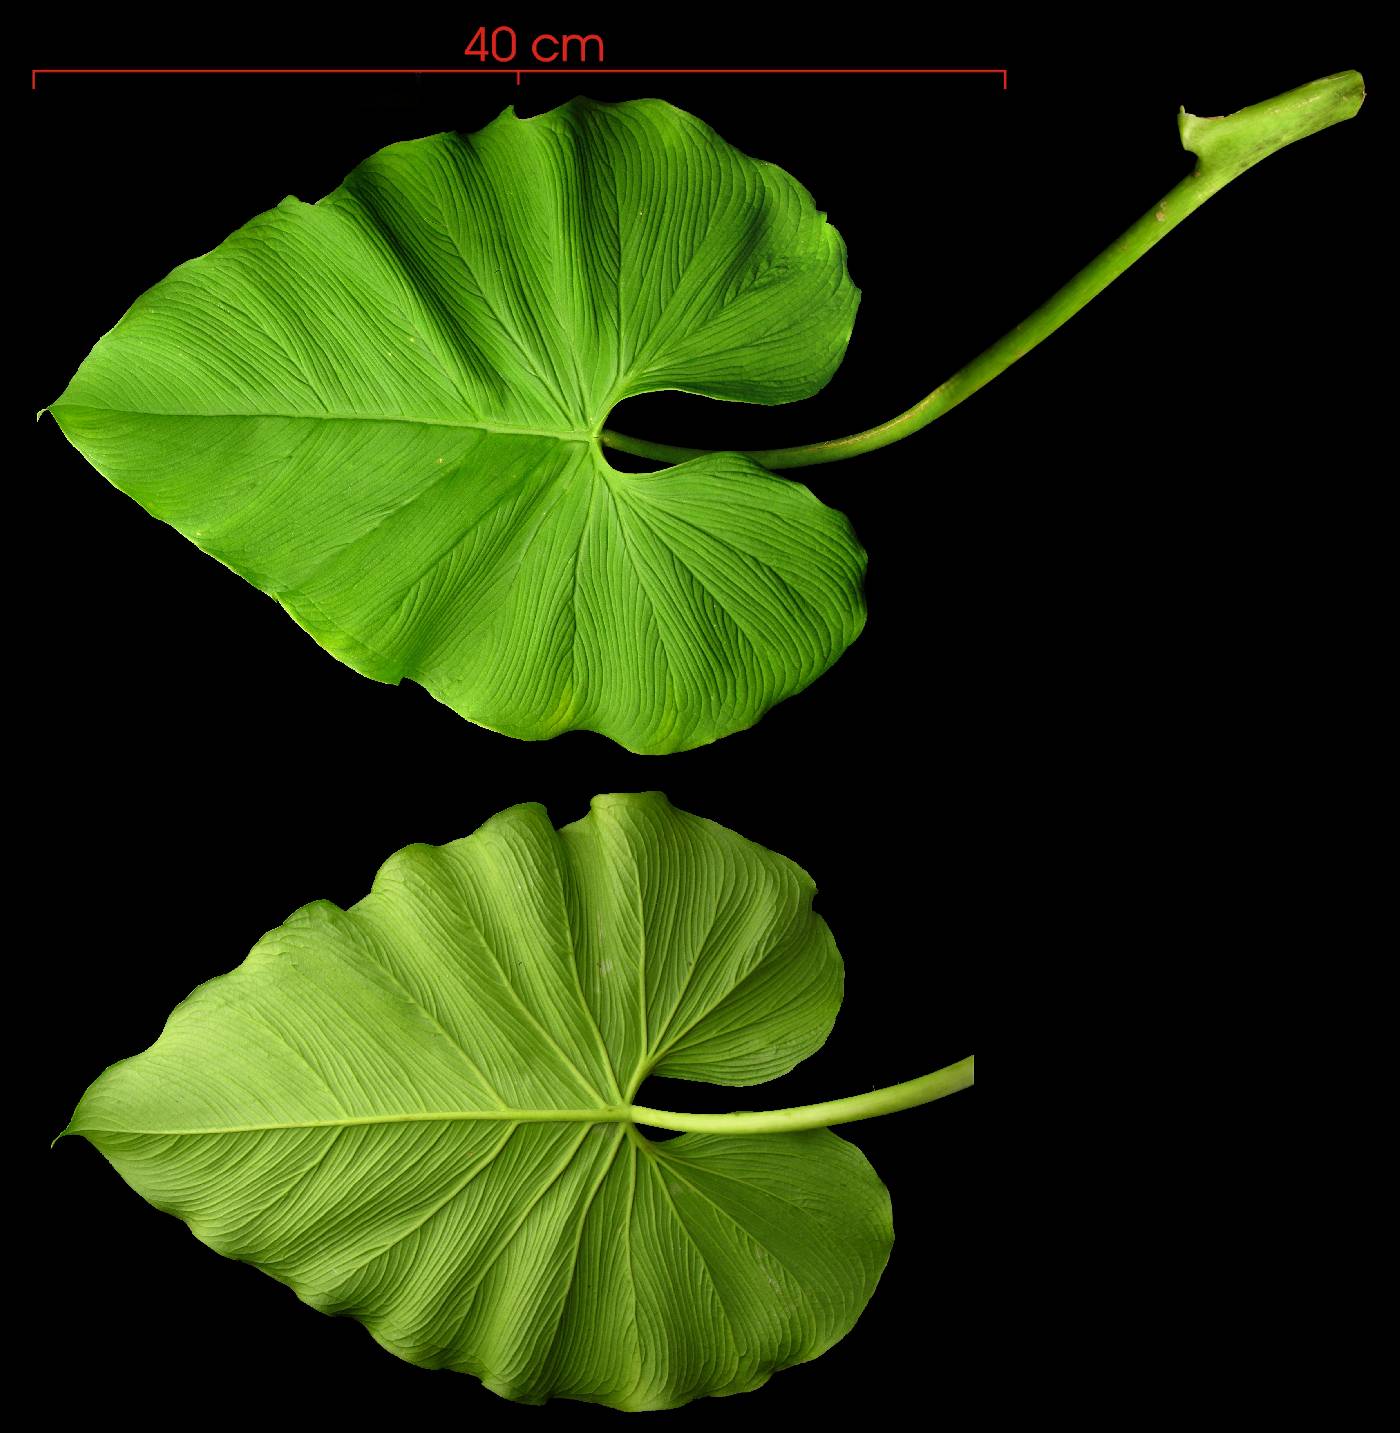 Philodendron jacquinii image